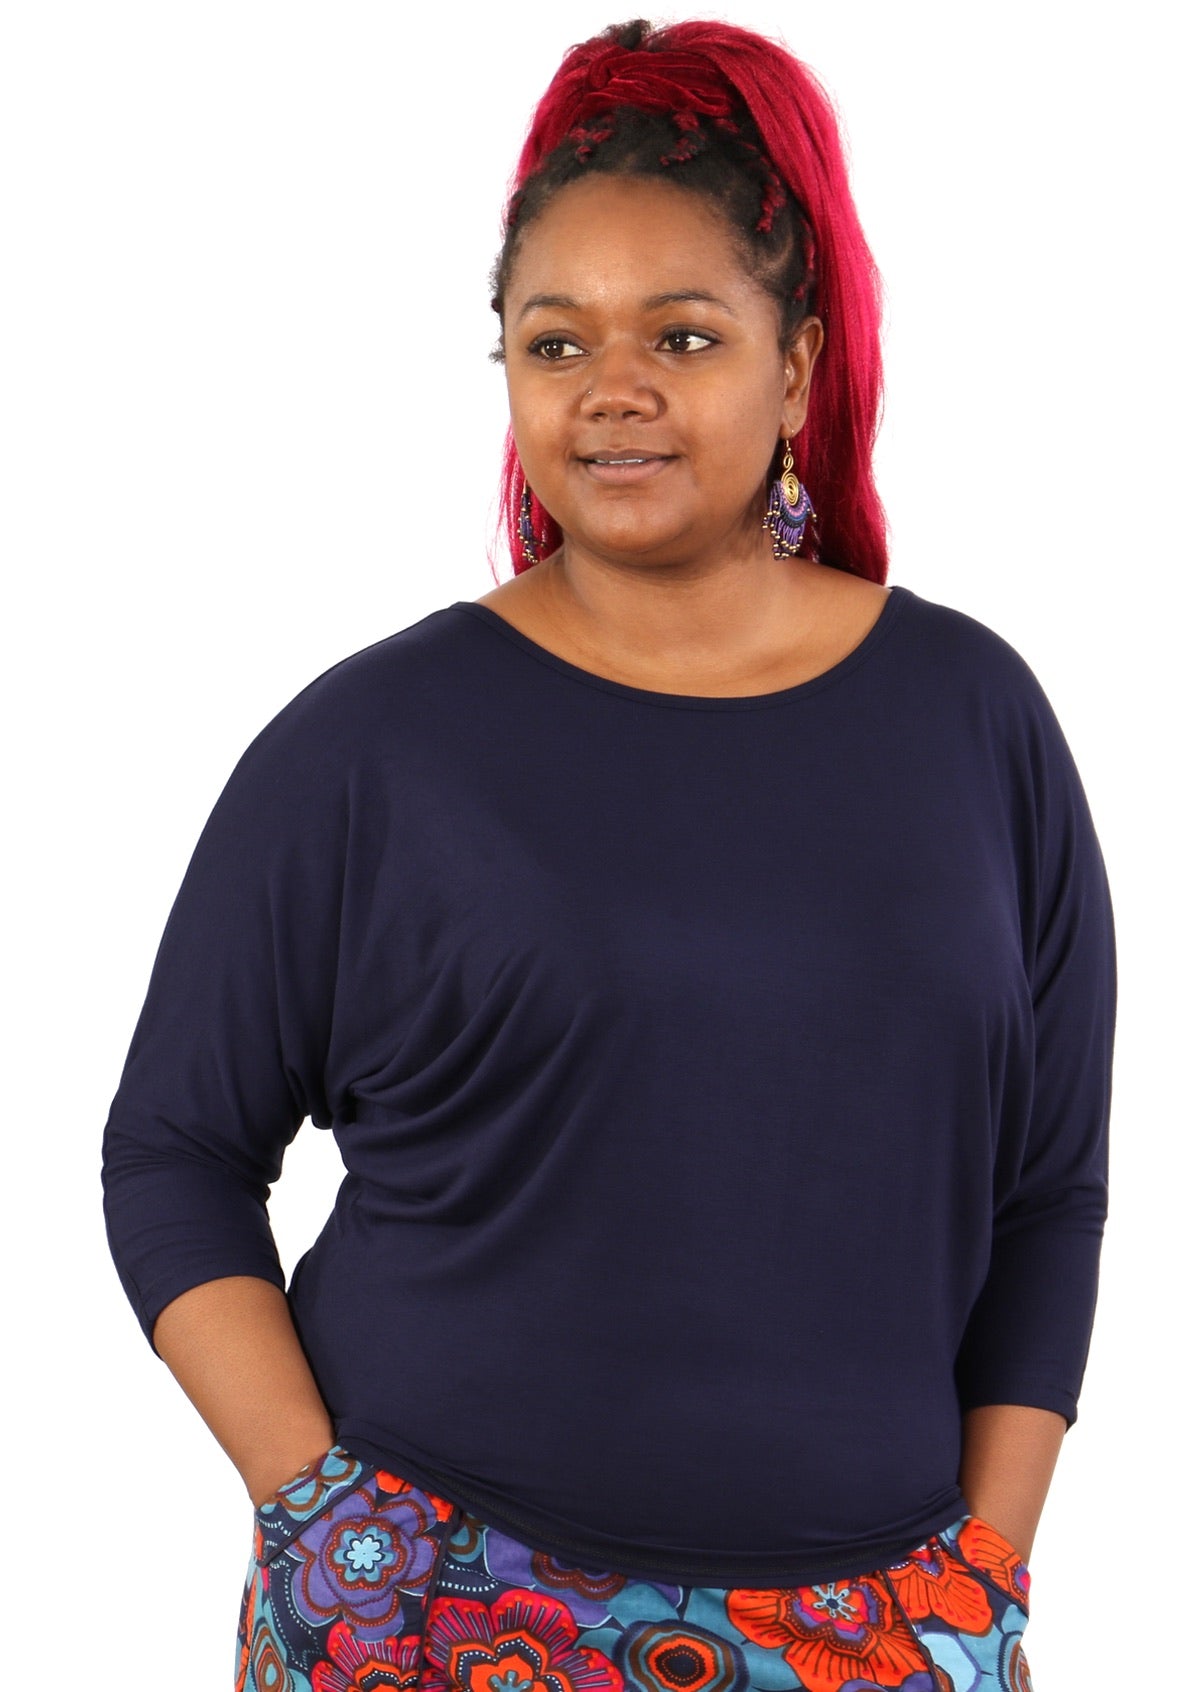 Woman with red hair wearing a 3/4 sleeve rayon batwing round neckline navy blue top.